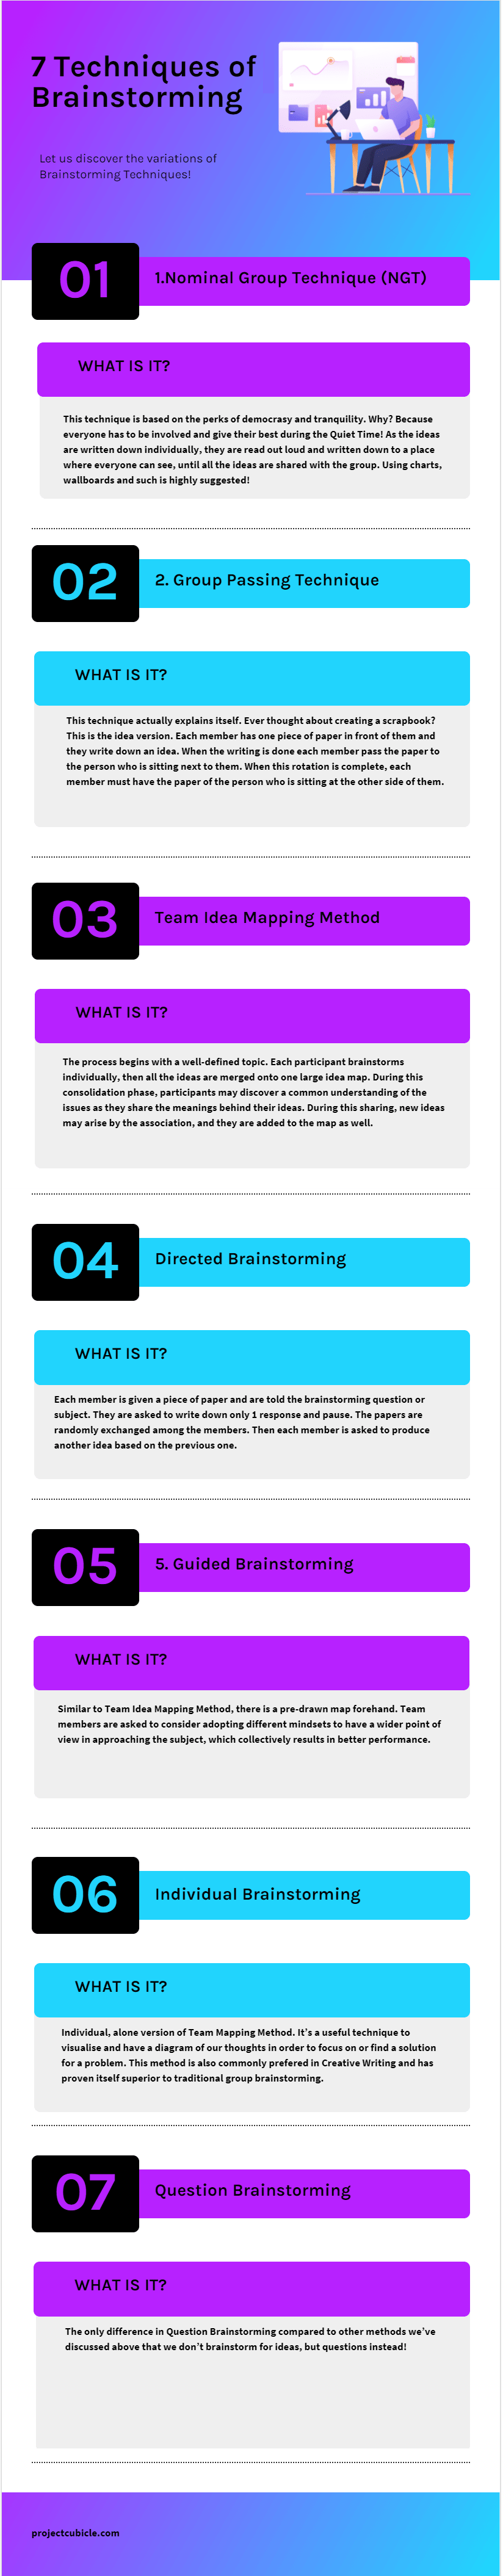 7 Techniques of Brainstorming-infographic